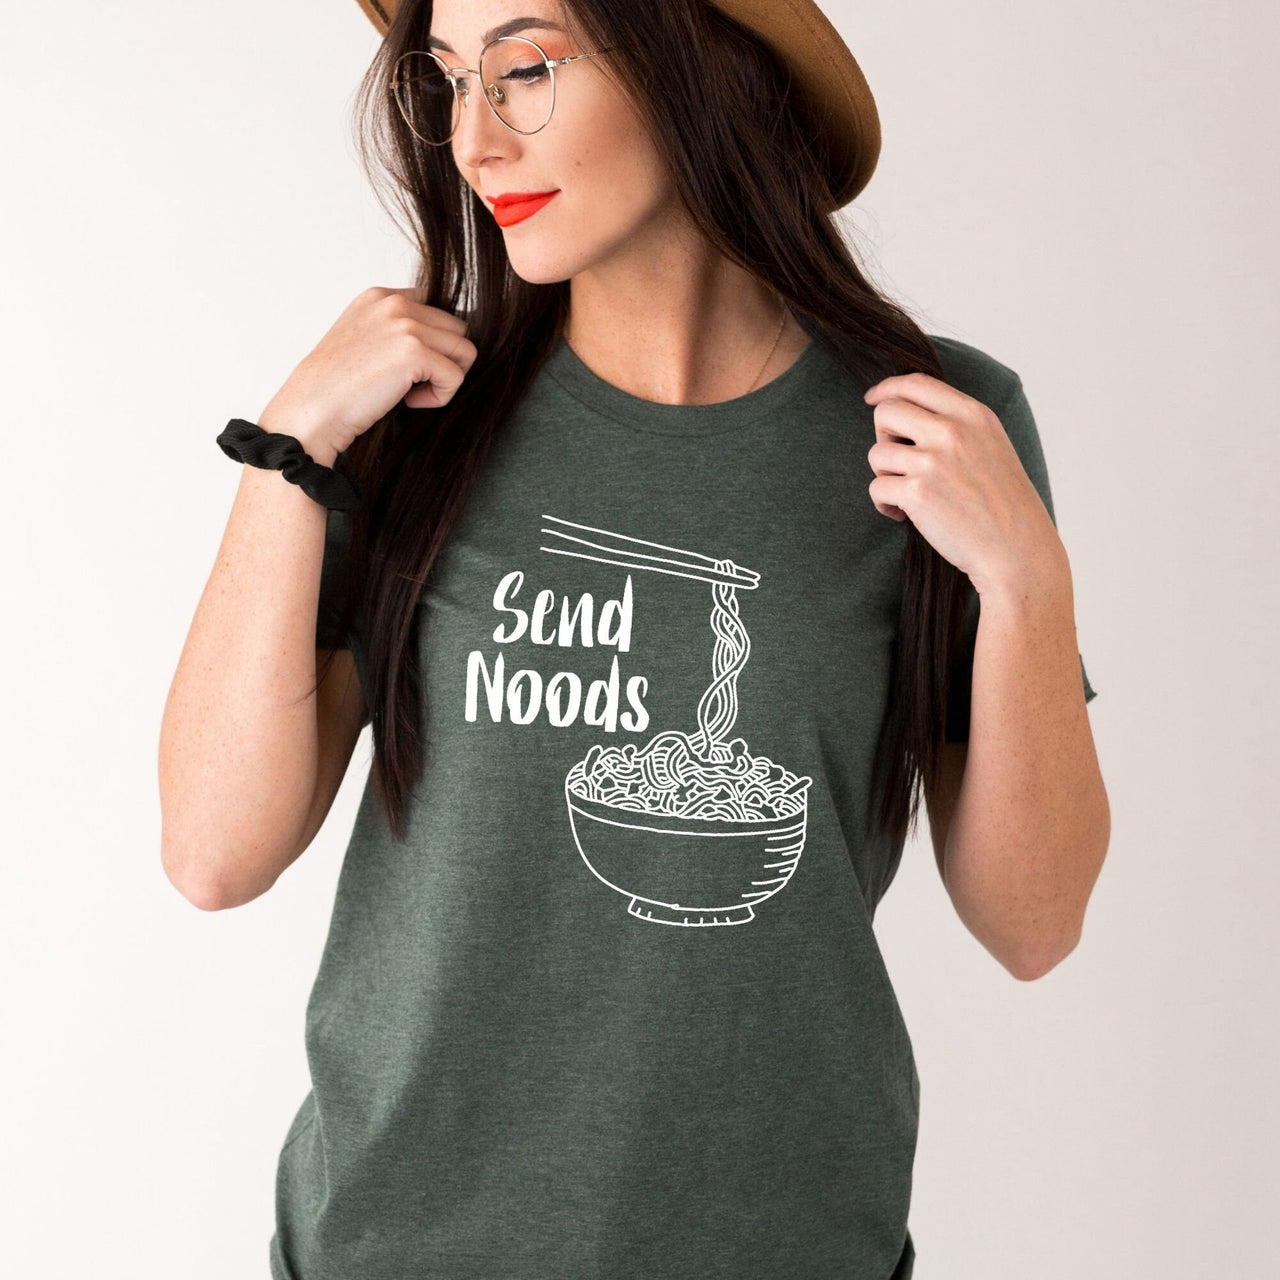 Send Noods, Foodie Shirt for Women - Mercantile Mountain